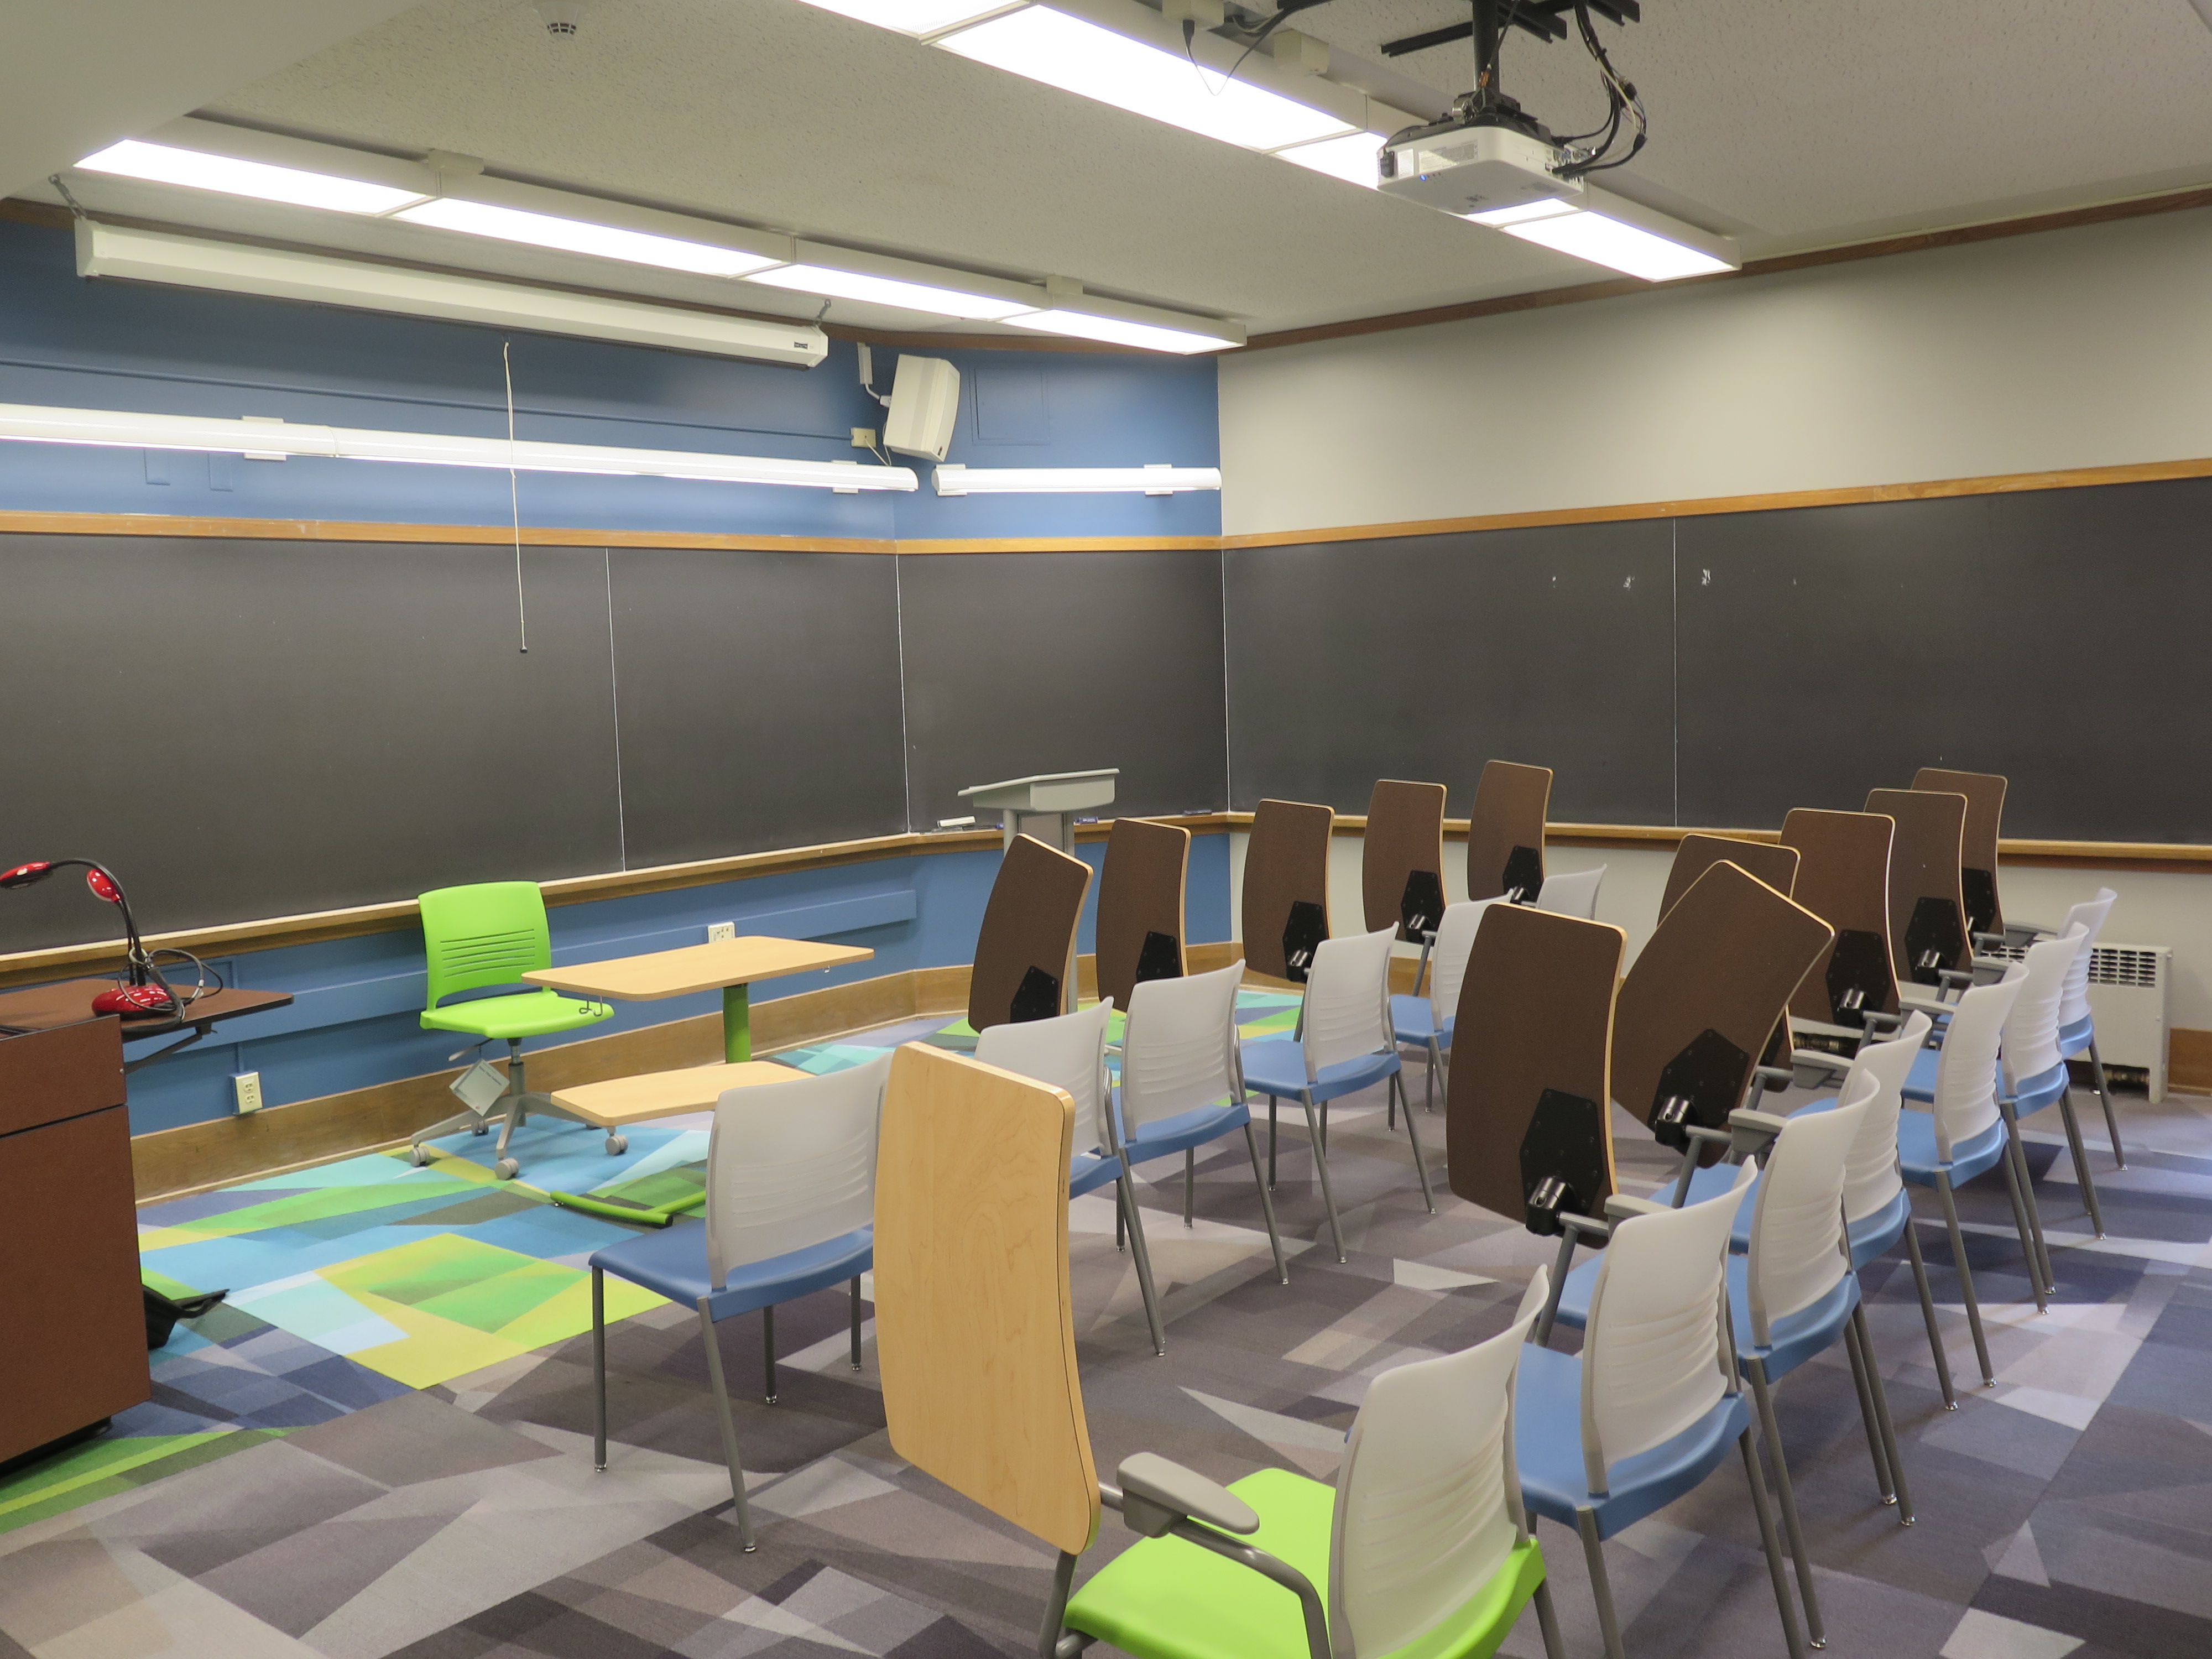 View from the back of the room, Carpet floors, Moveable tablet arm chairs. Podium at the front of room. Chalk boards on three of four walls.